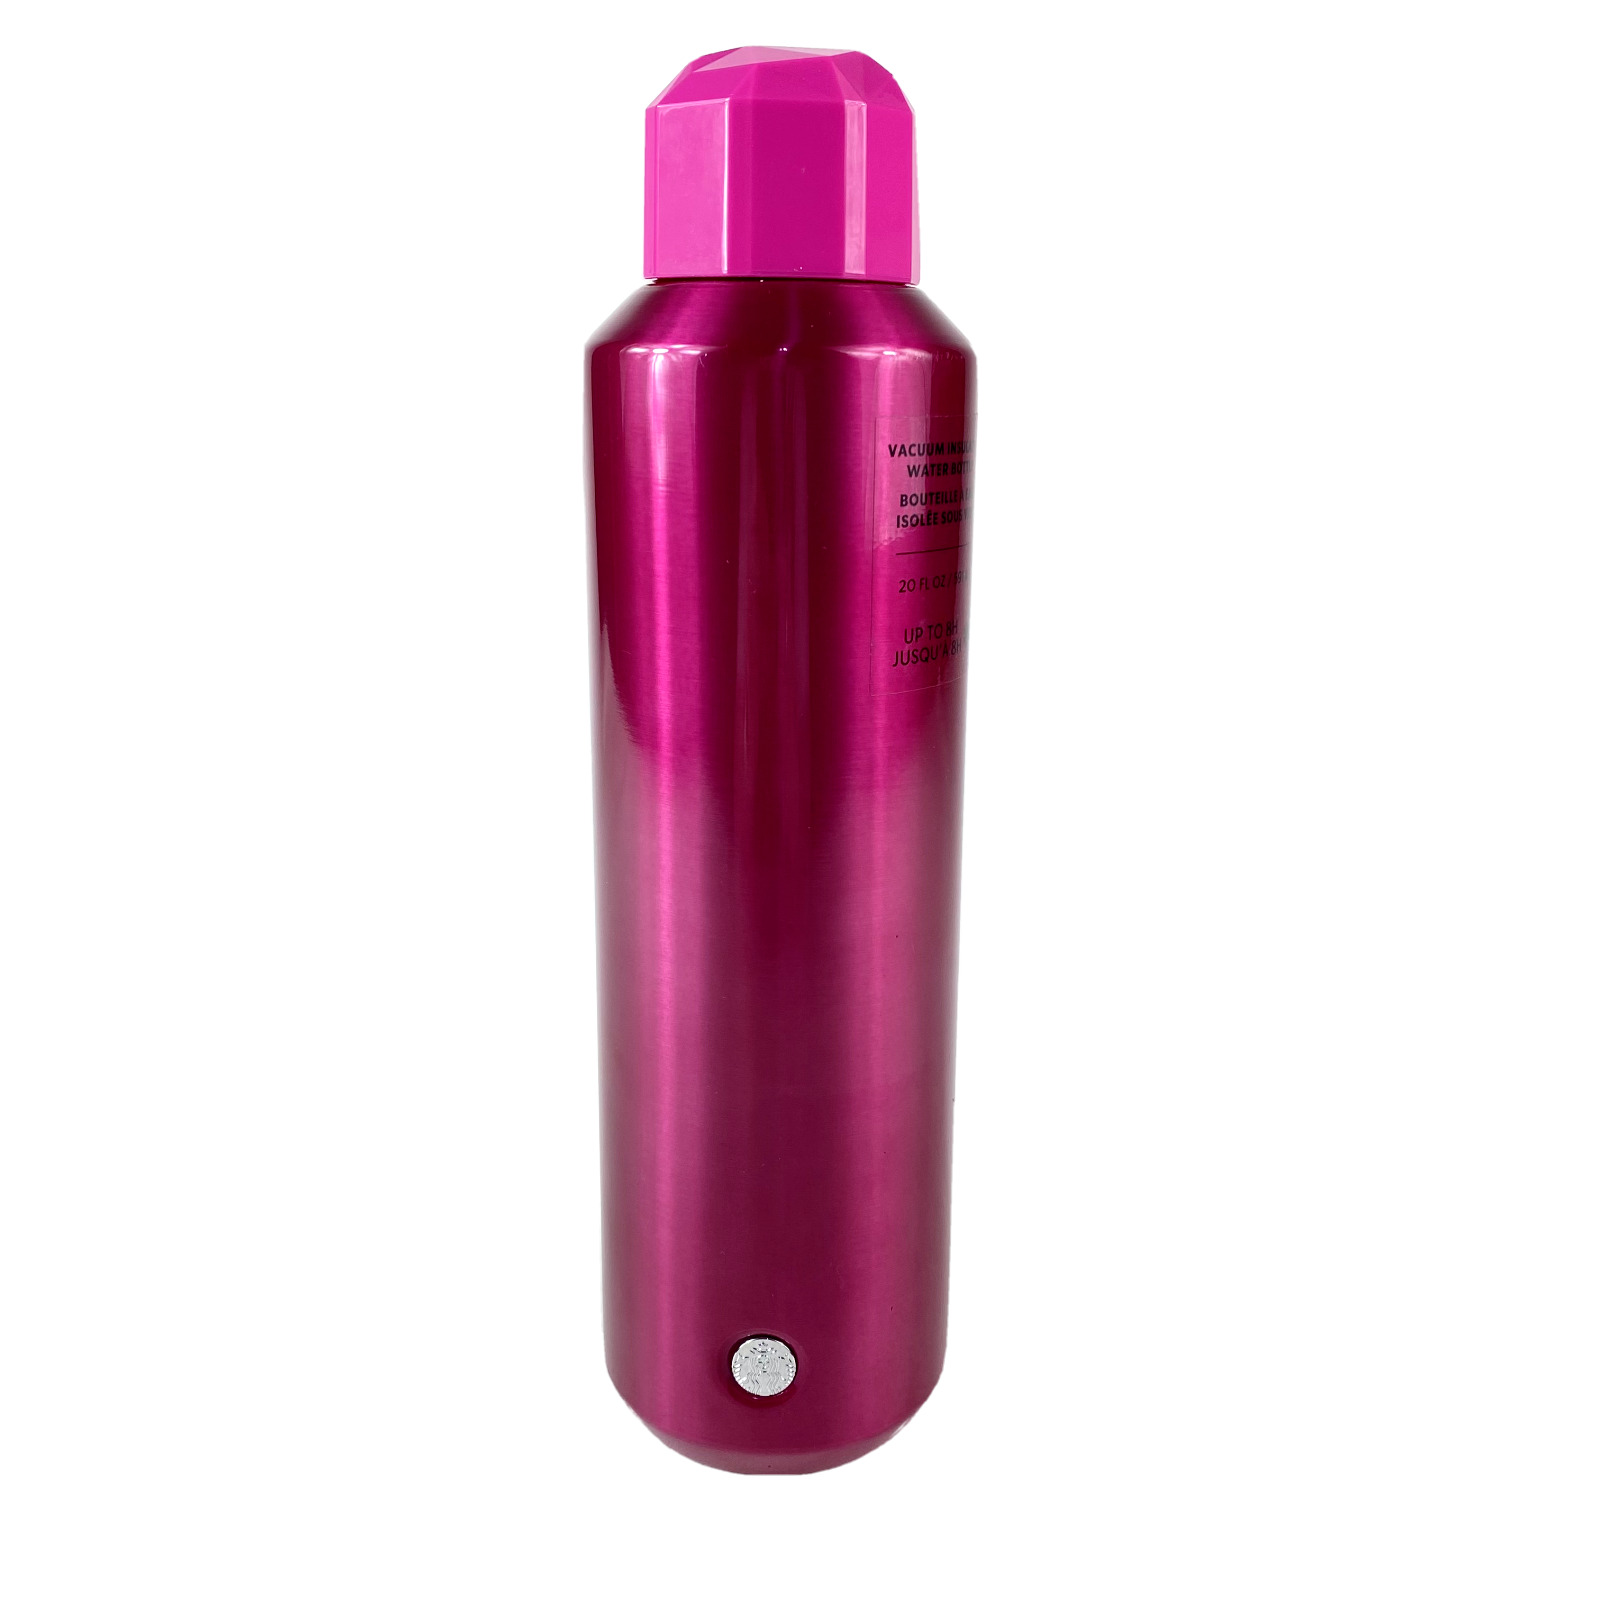 Starbucks Vacuum Insulated Tall Water Bottle Barbie Pink 20oz New without Box